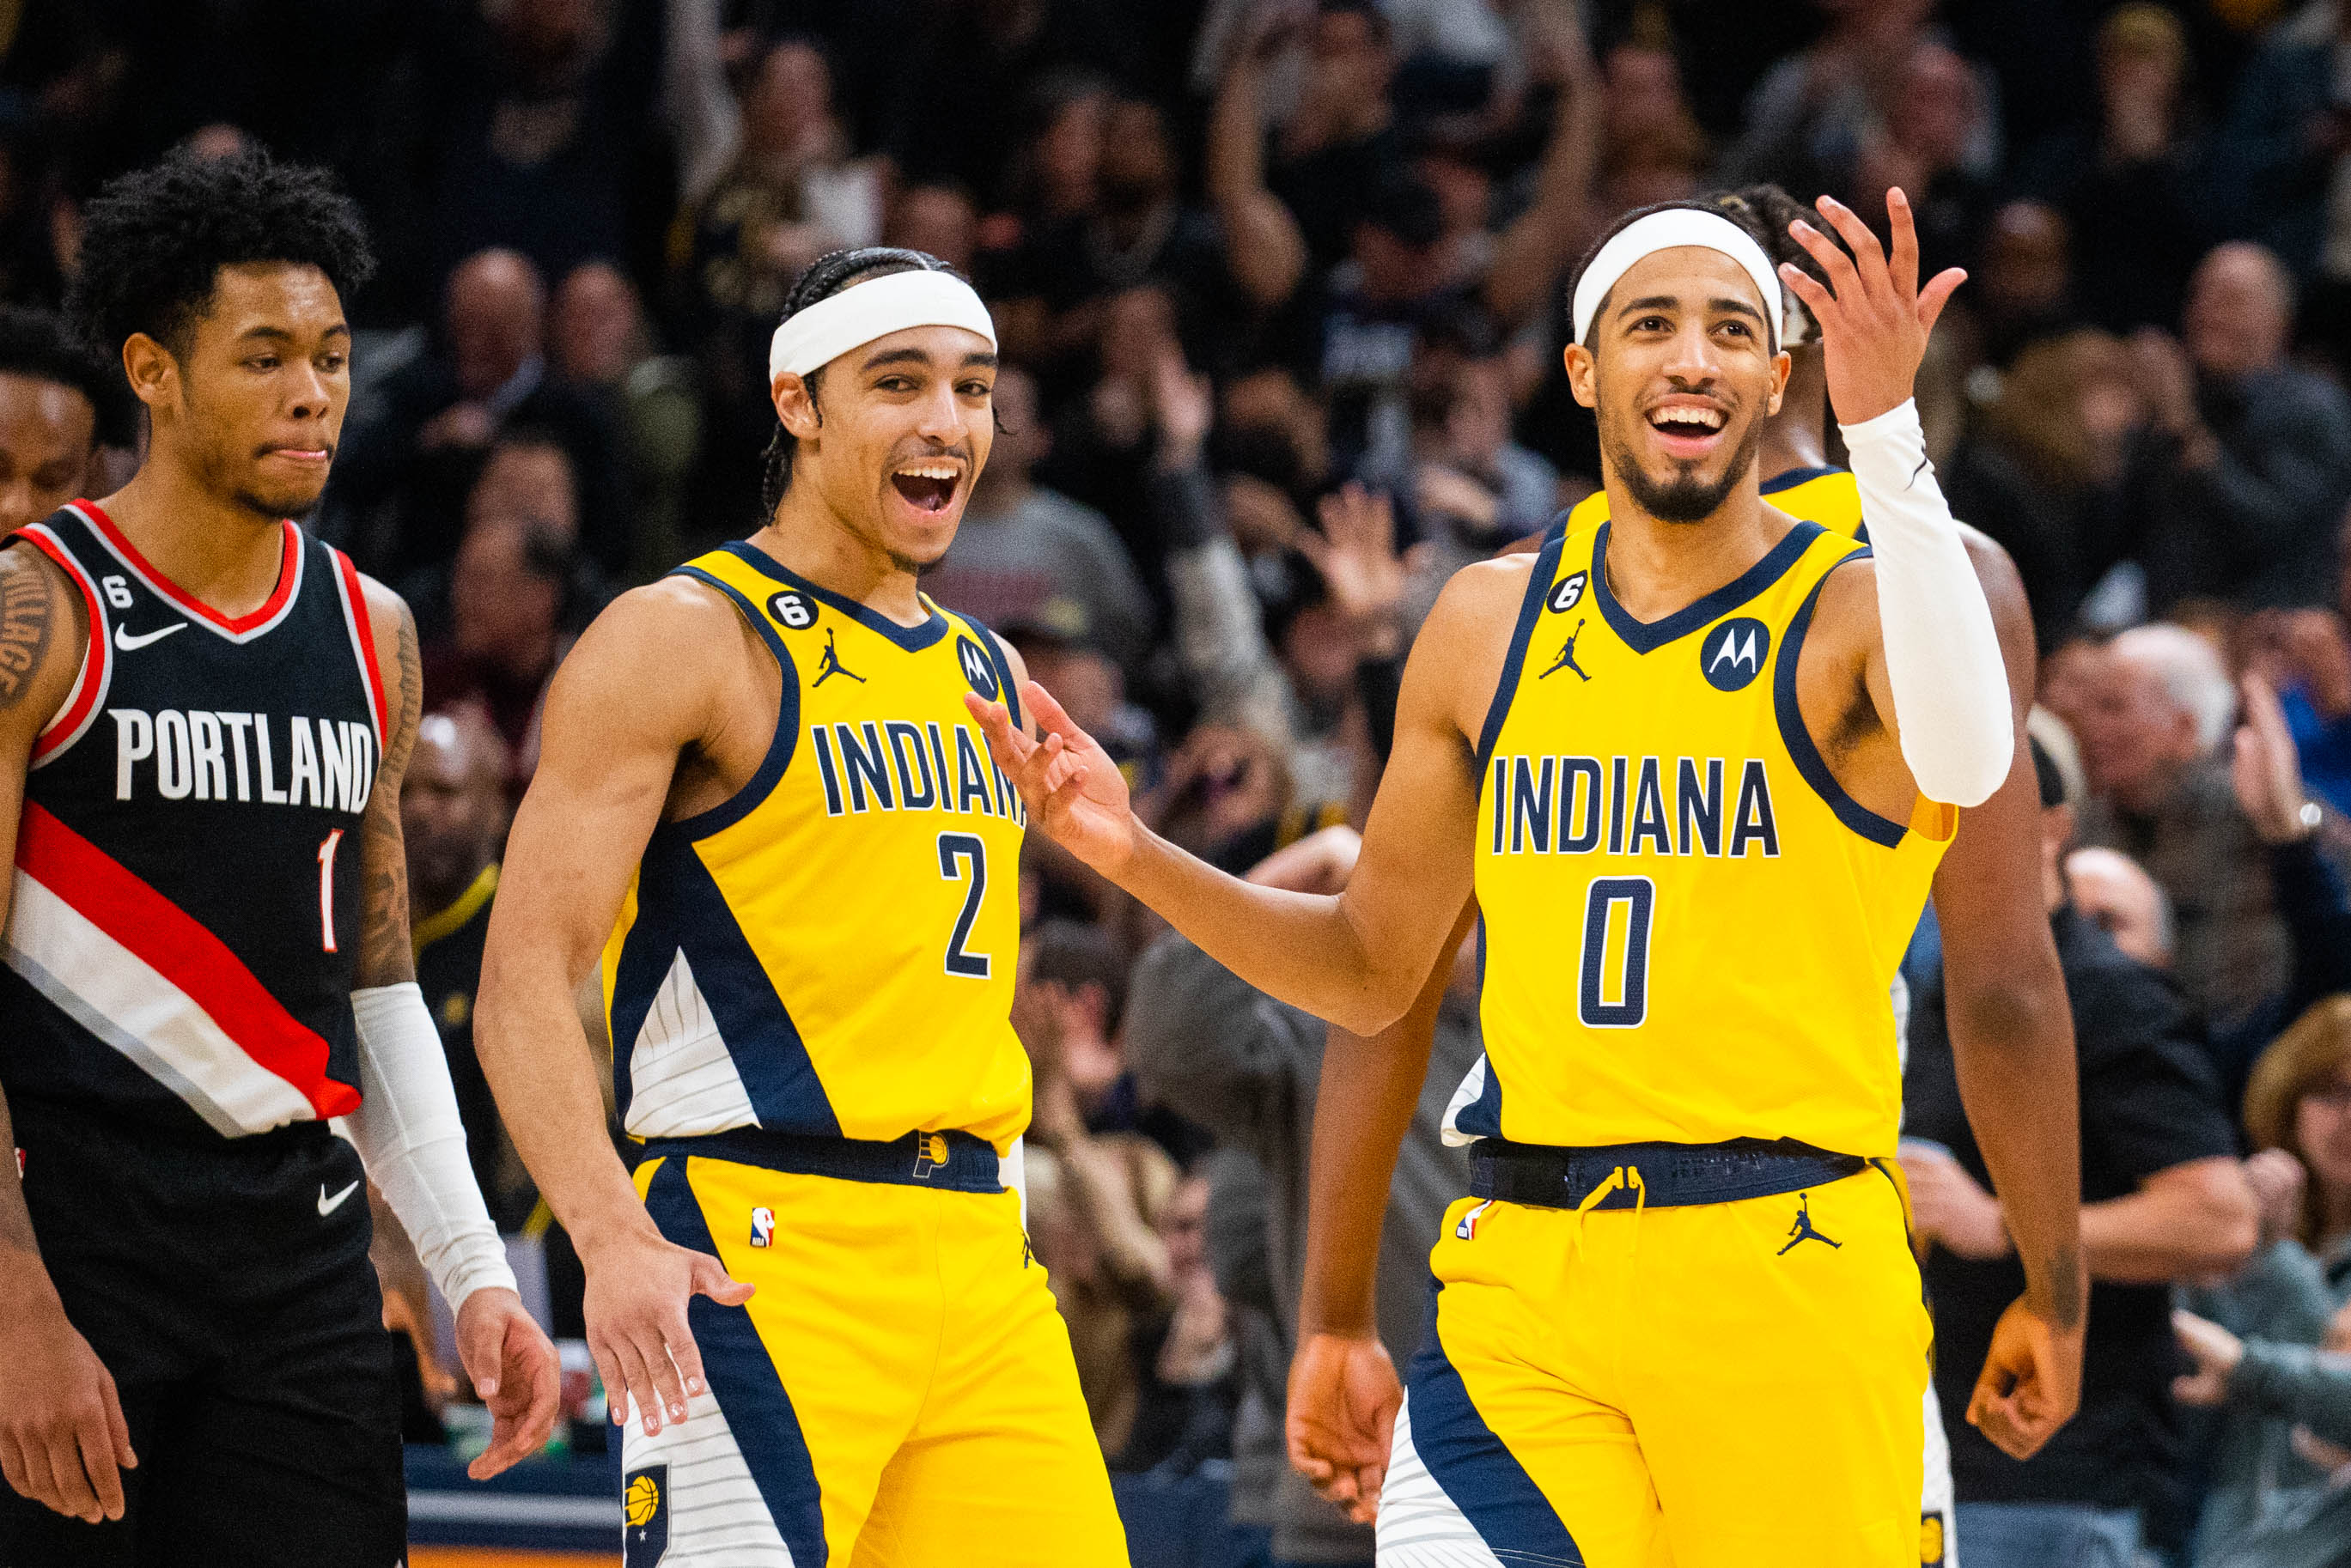 The Indiana Pacers have become one of the best clutch teams in the NBA